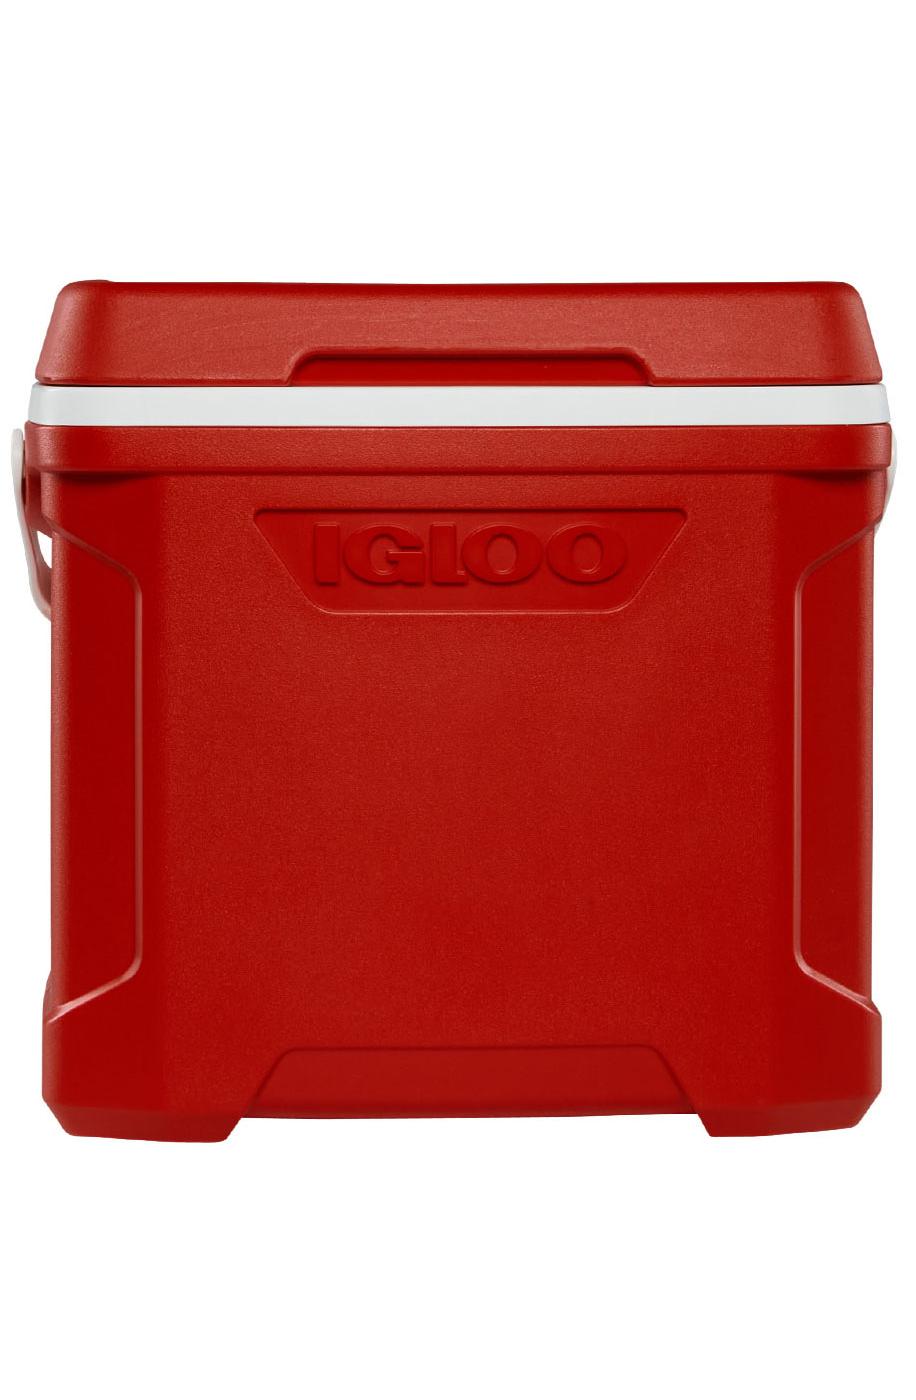 Igloo Red Profile II Cooler - Shop Coolers & Ice Packs at